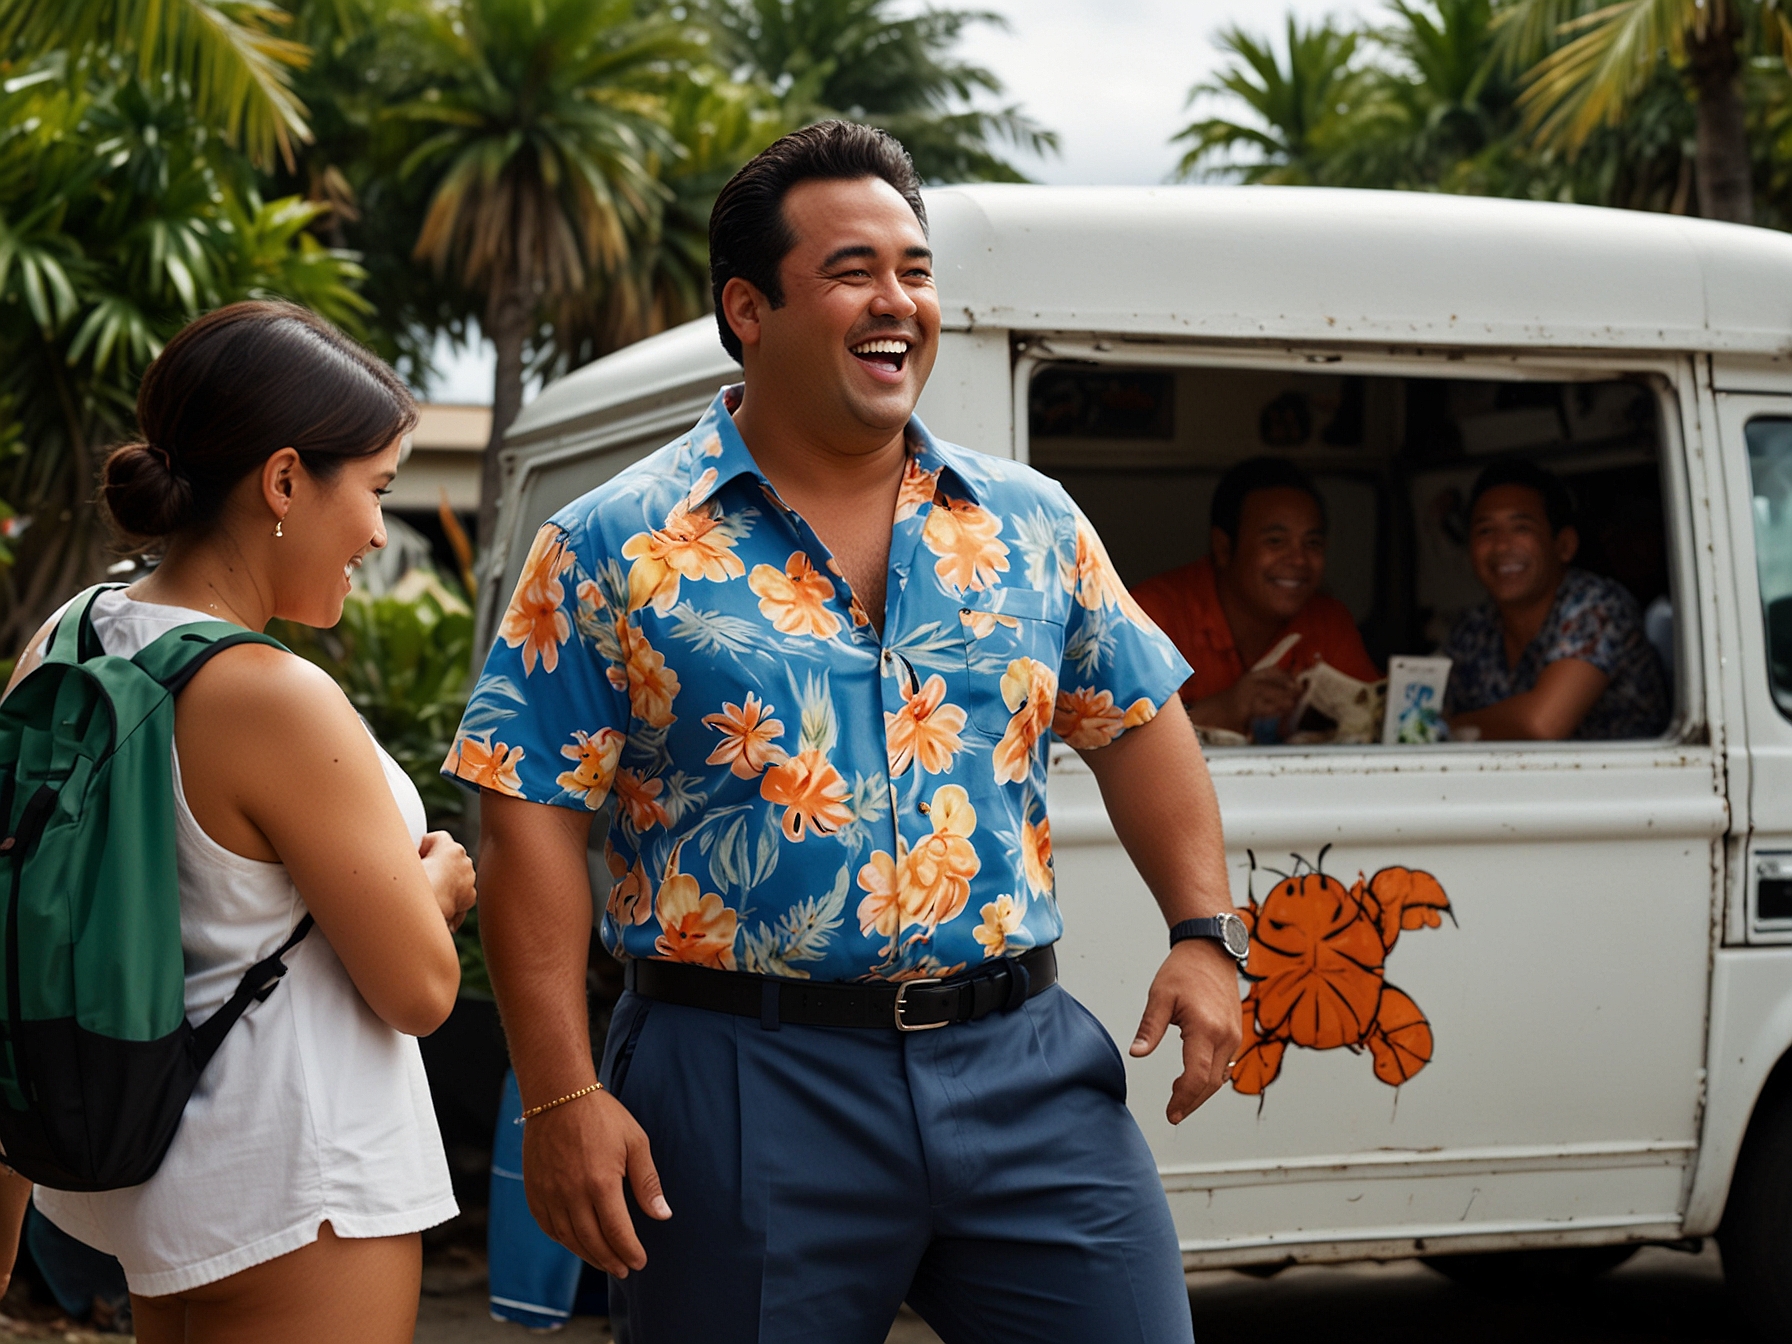 Taylor Wily, in his iconic Kamekona Tupuola character, stands next to his signature shrimp truck, sharing a laugh with co-stars in a light-hearted 'Hawaii Five-0' scene, symbolizing his charisma and charm.